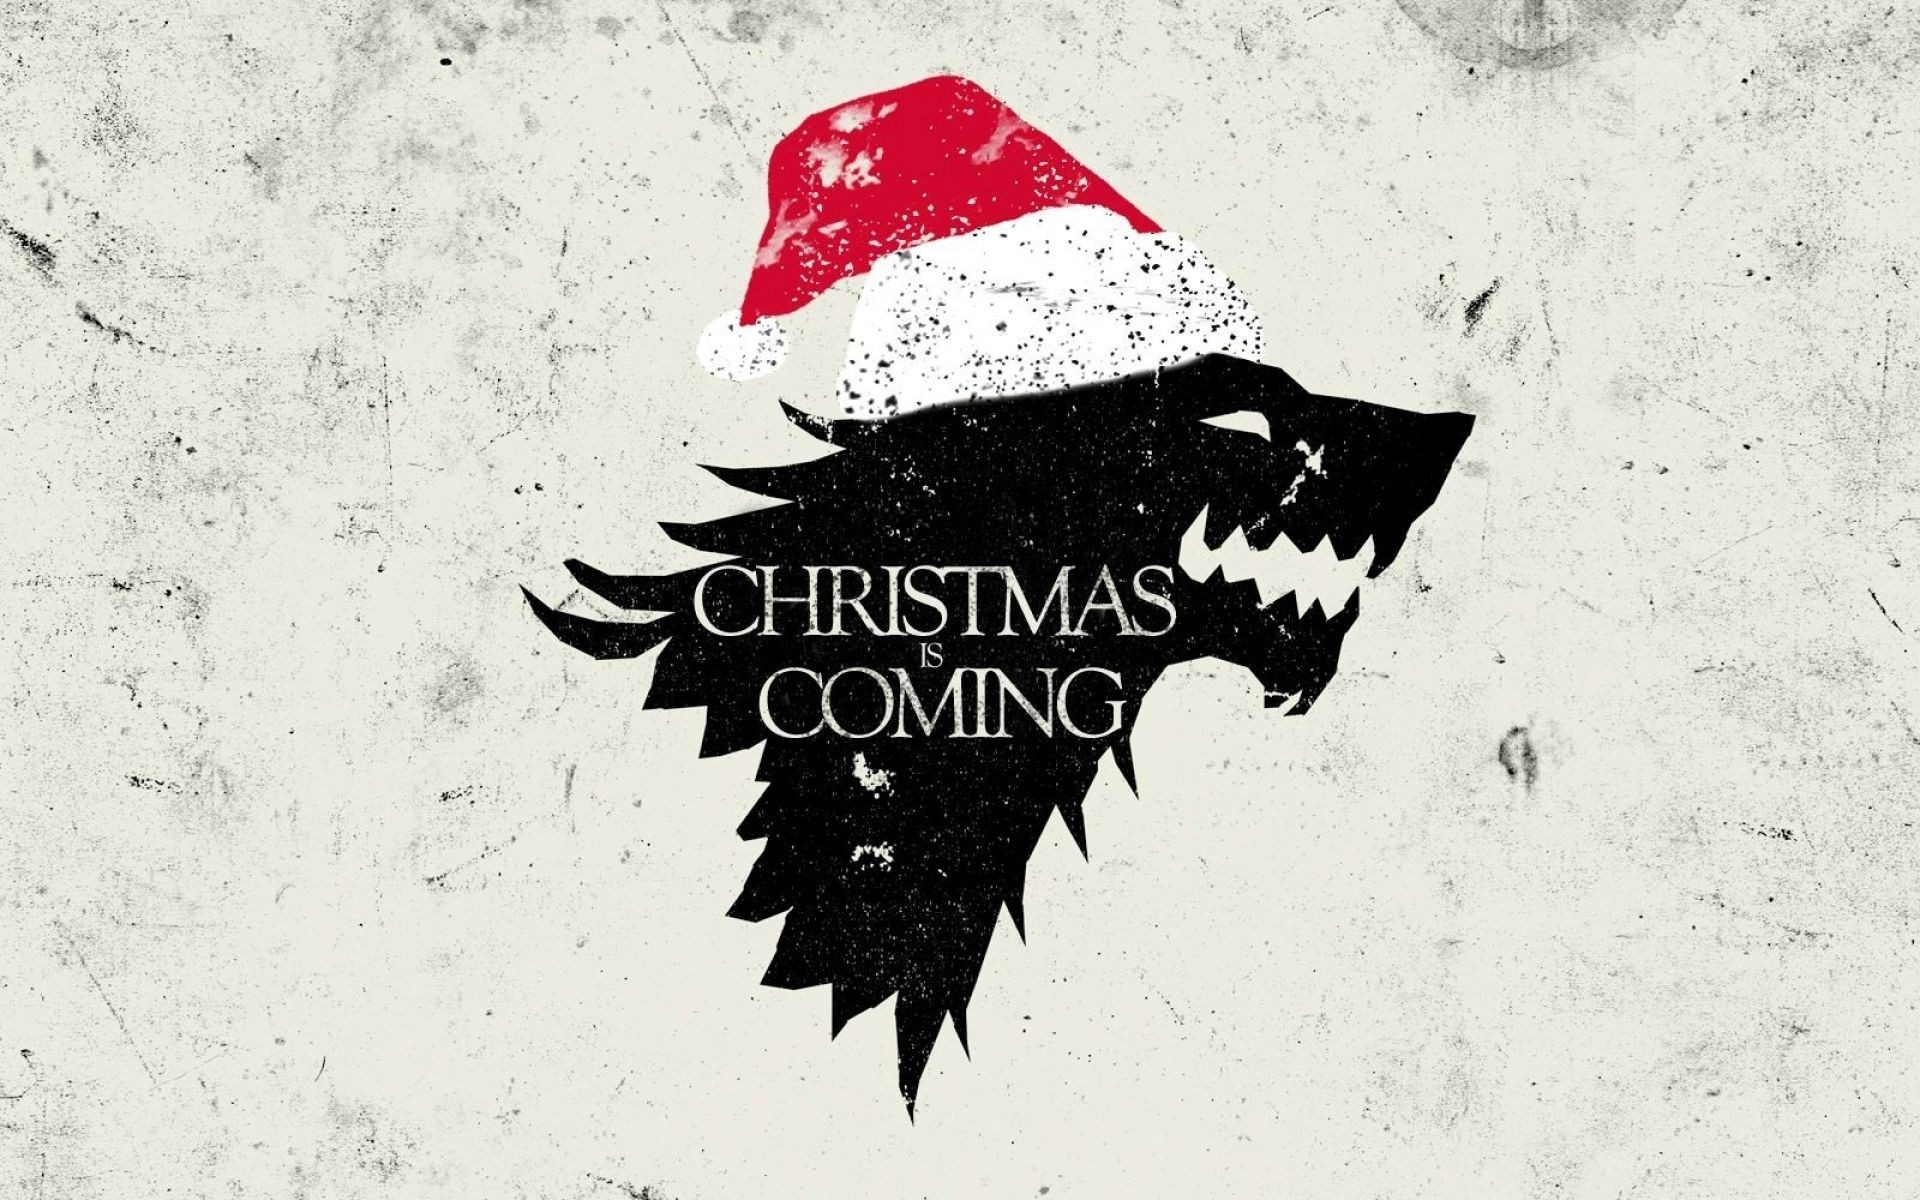 Game Of Thrones, Parody, Direwolf, Winter Is Coming, Christmas Wallpaper